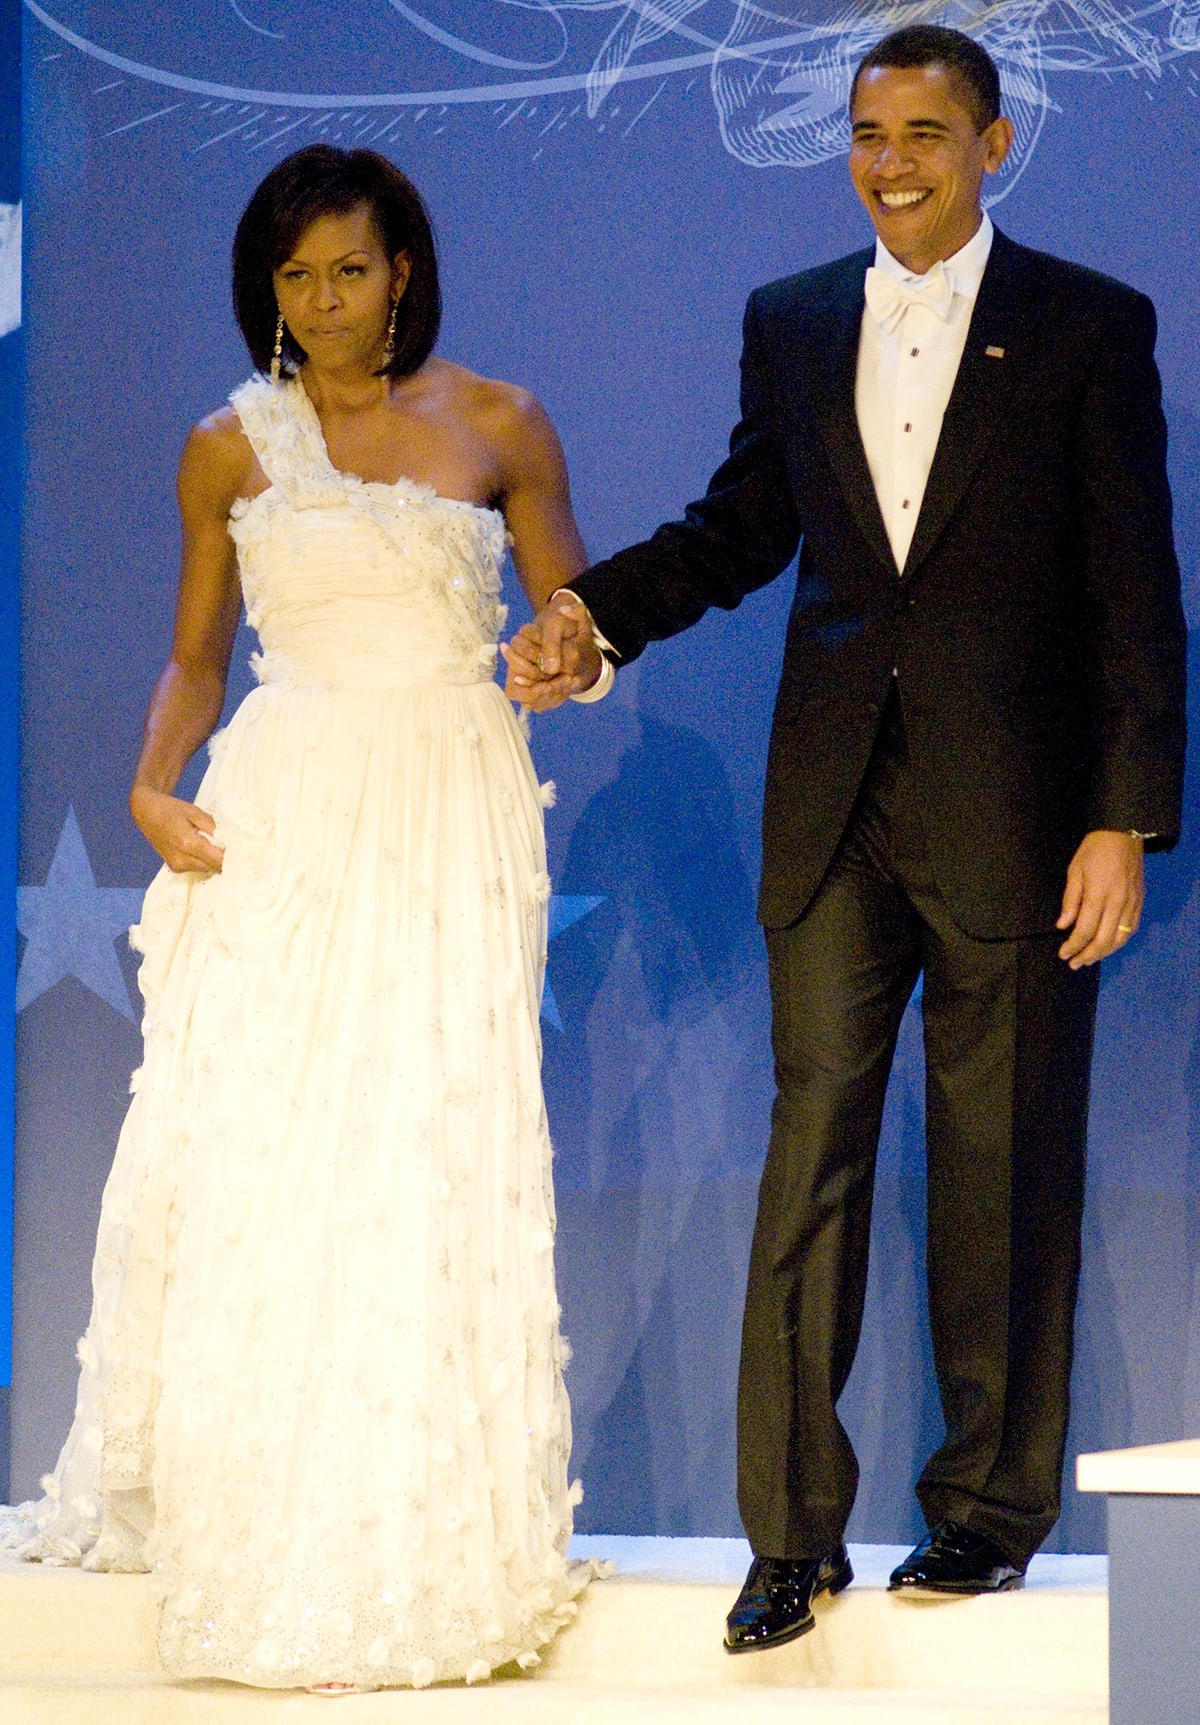 Michelle Obama wearing a custom Jason Wu gown at the 2009 Presidential Inauguration: Home State Inaugural Ball